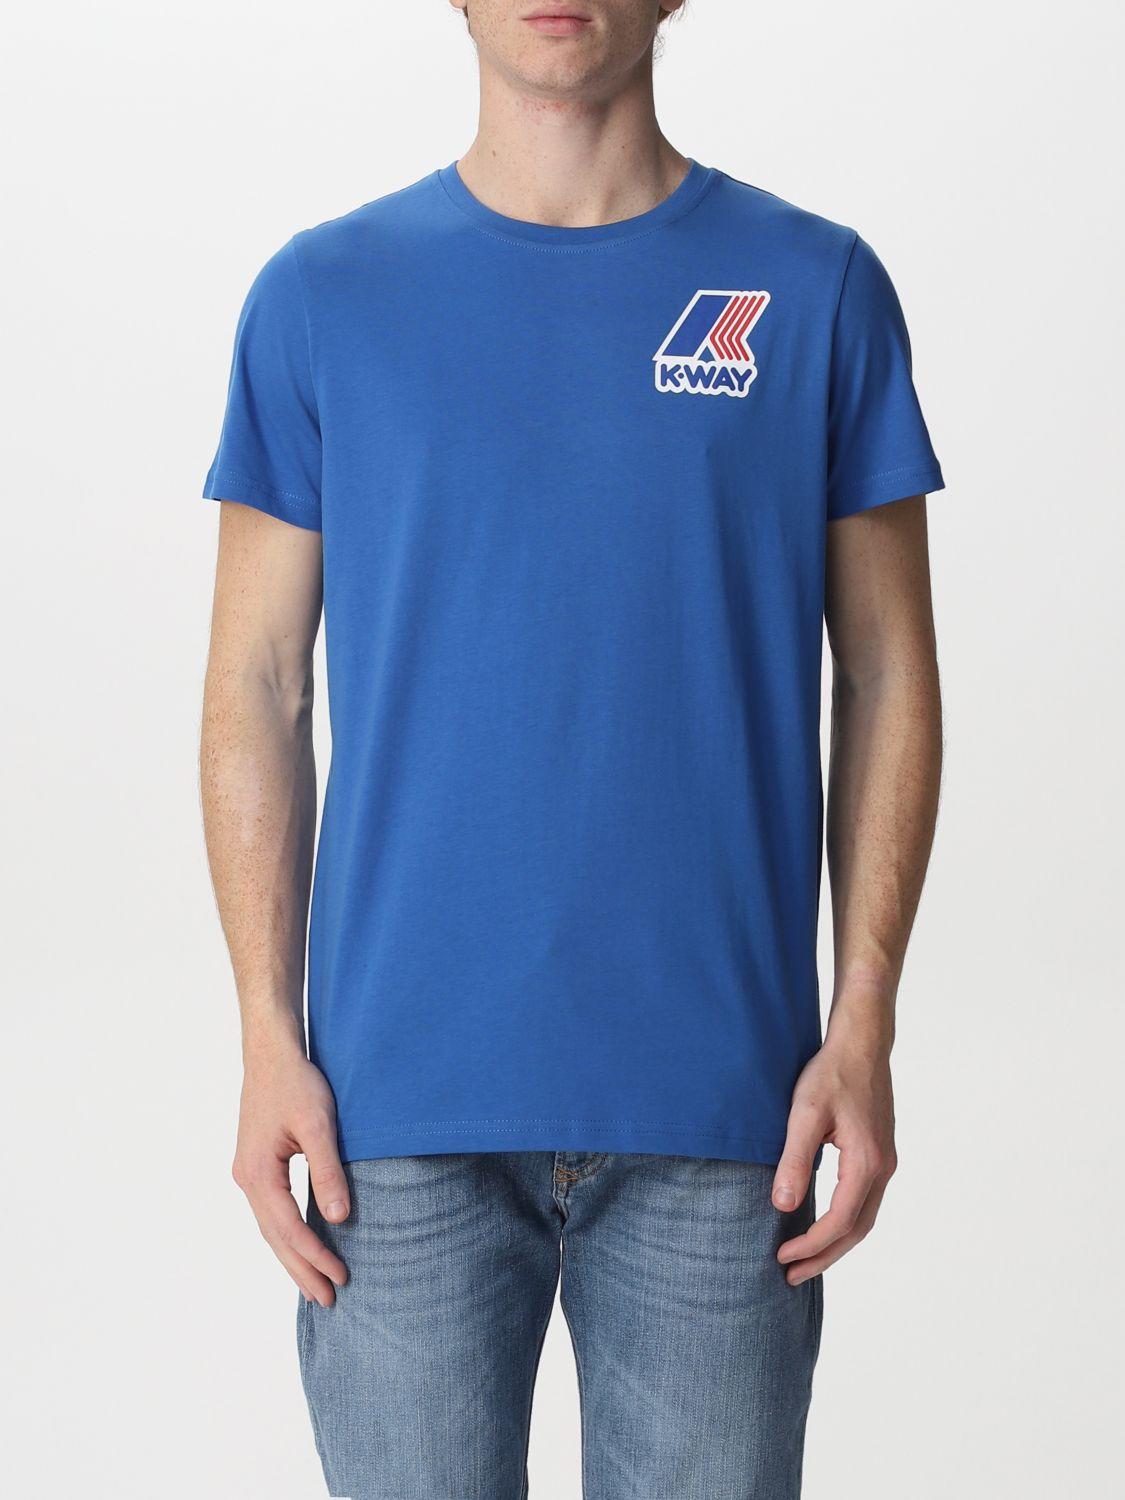 K-Way T-shirt in Blue for Men - Lyst